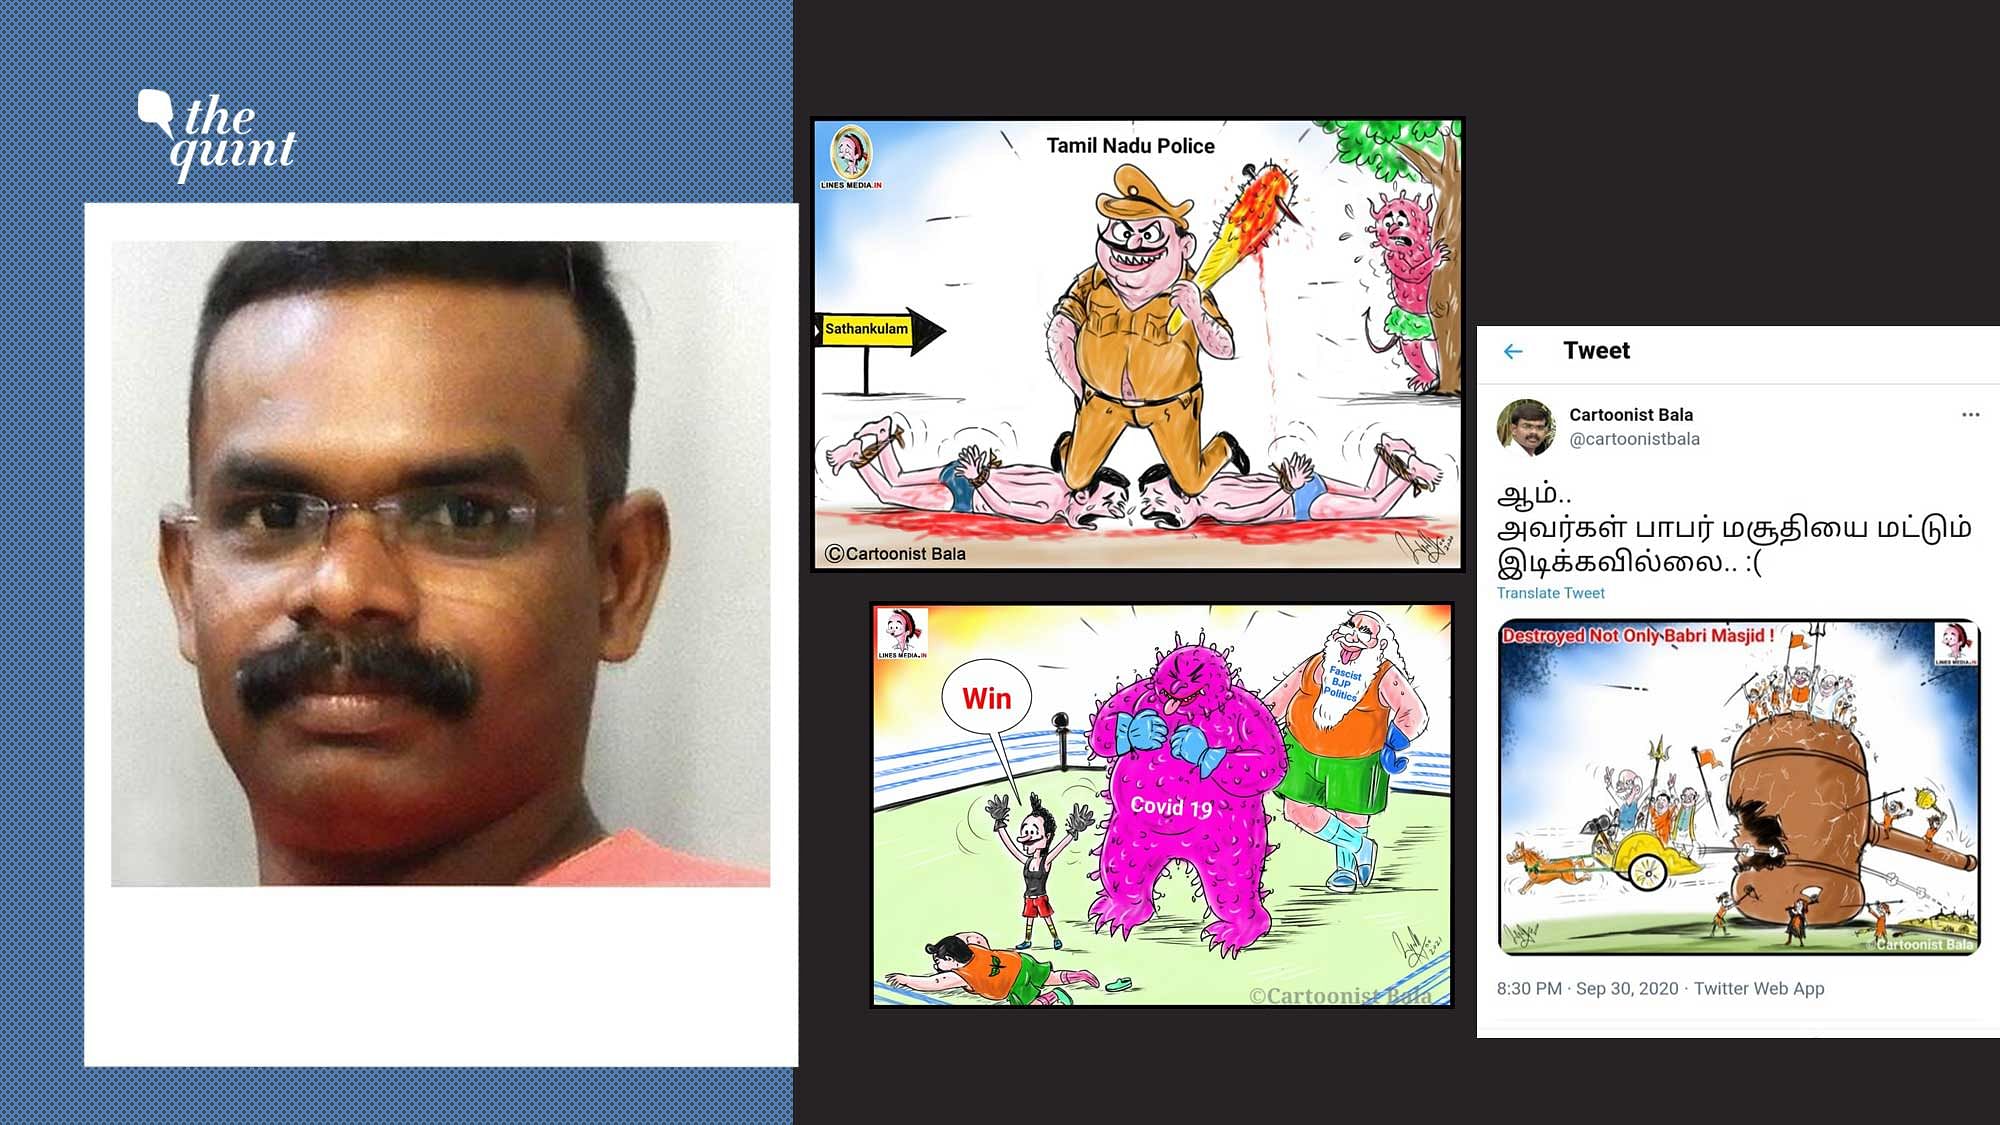 Cartoonist G Bala was intimated by Twitter that they have received a complaint from the Government of India that claimed one of his cartoons violated the law.